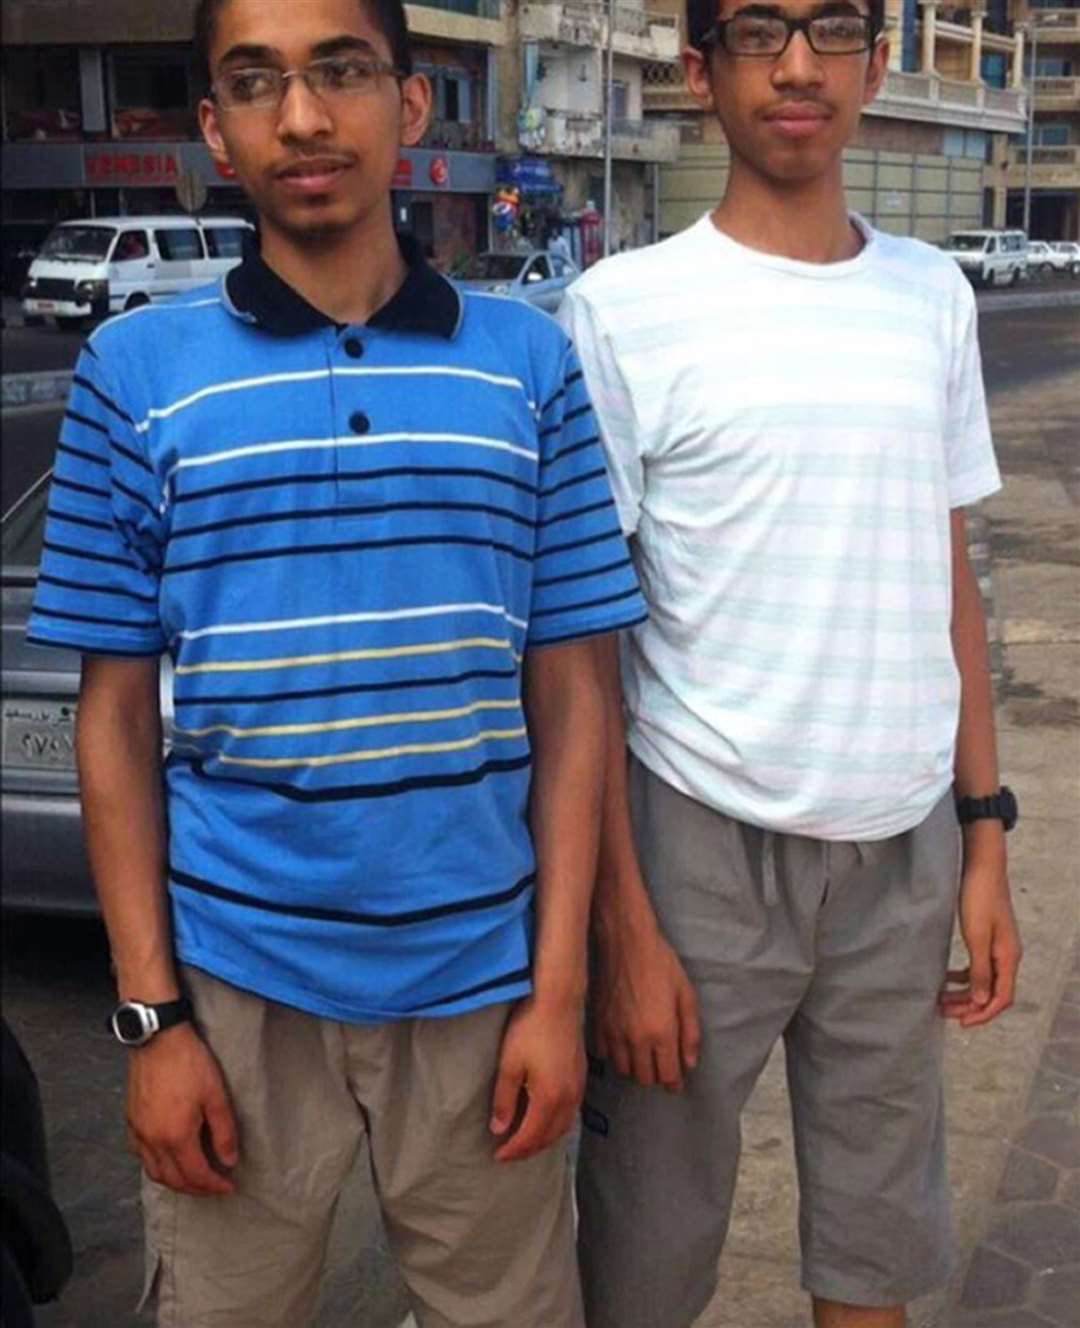 Wail Aweys (left) and Suleyman Aweys (right) are believed to have been killed in Syria (Met Police/PA)